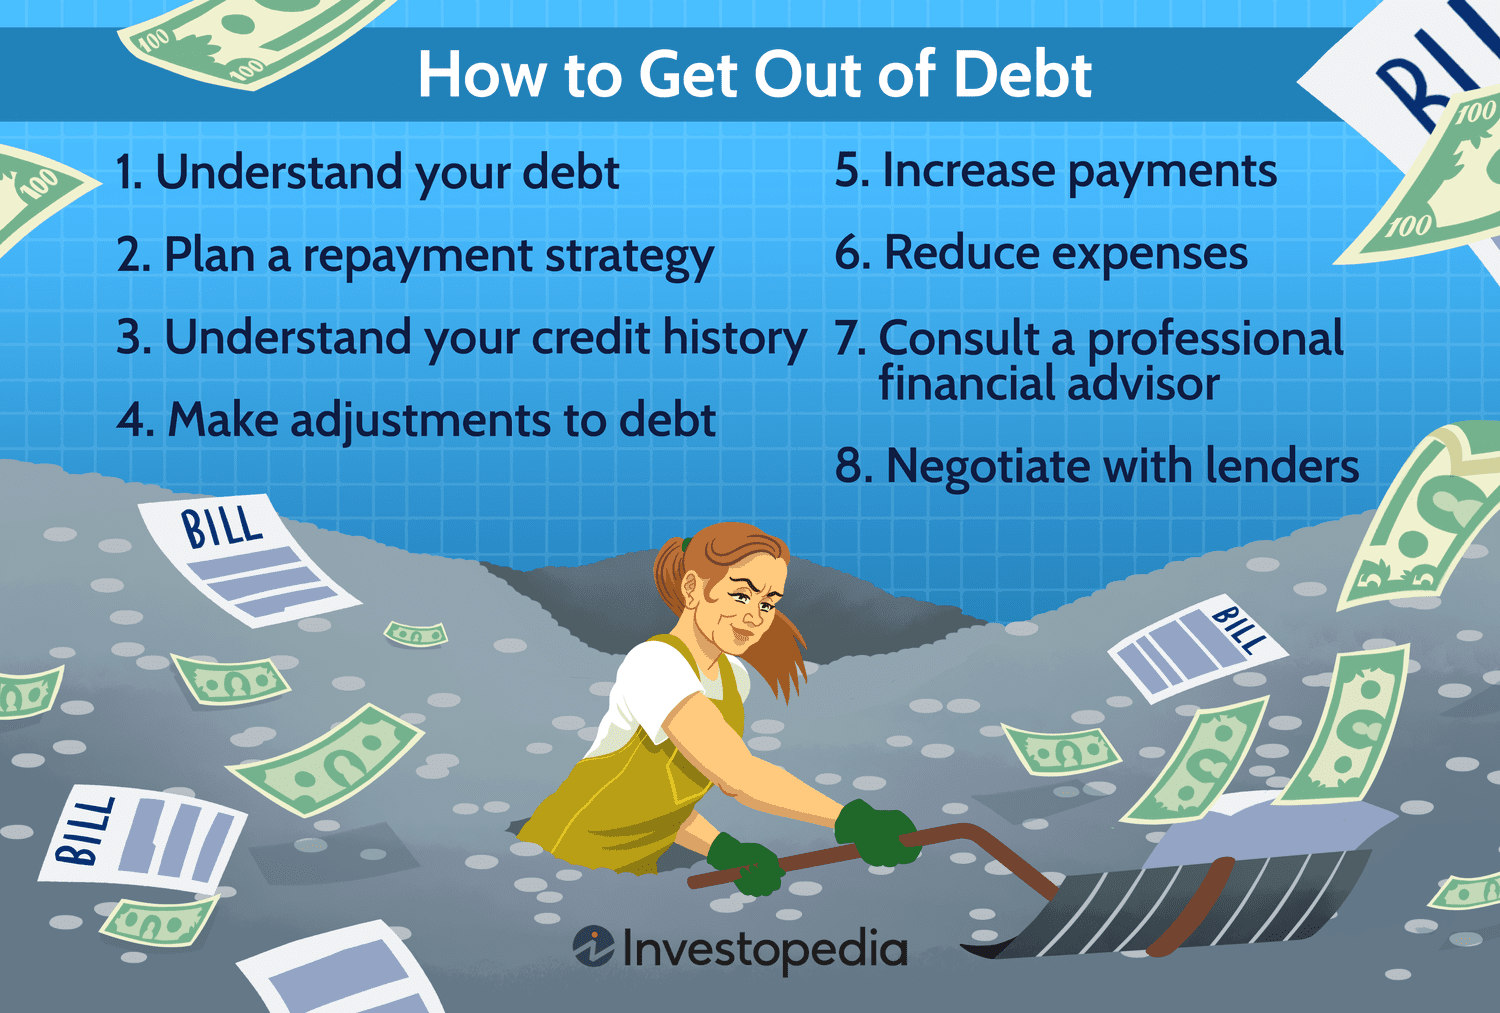 Getting Out of Debt With No Money